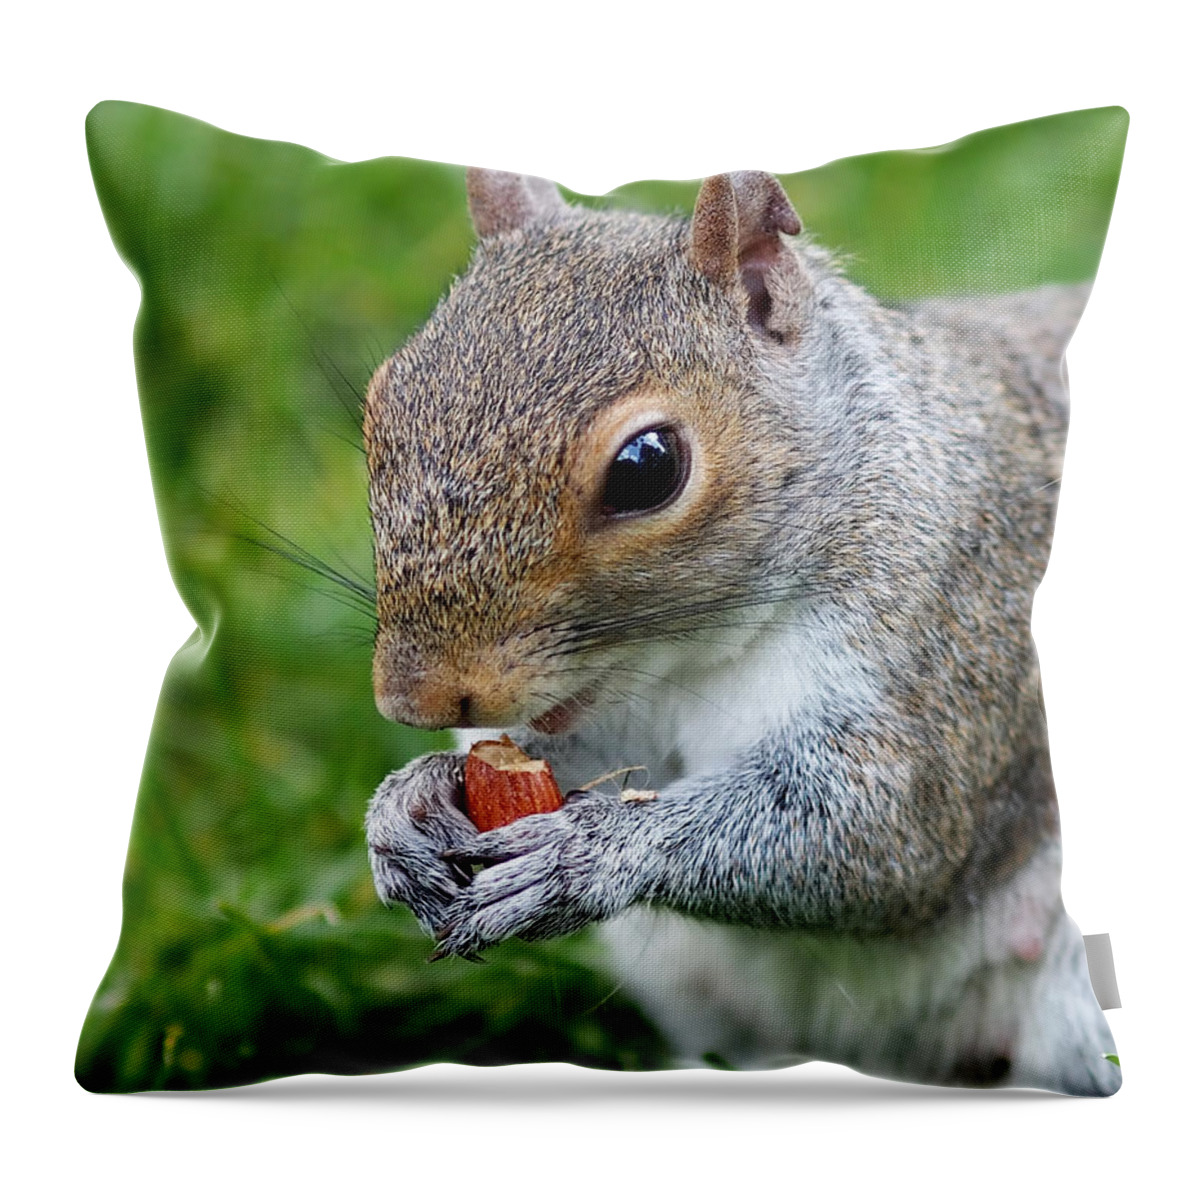 Squirrel Throw Pillow featuring the photograph Snack Break for Squirrel by Rona Black